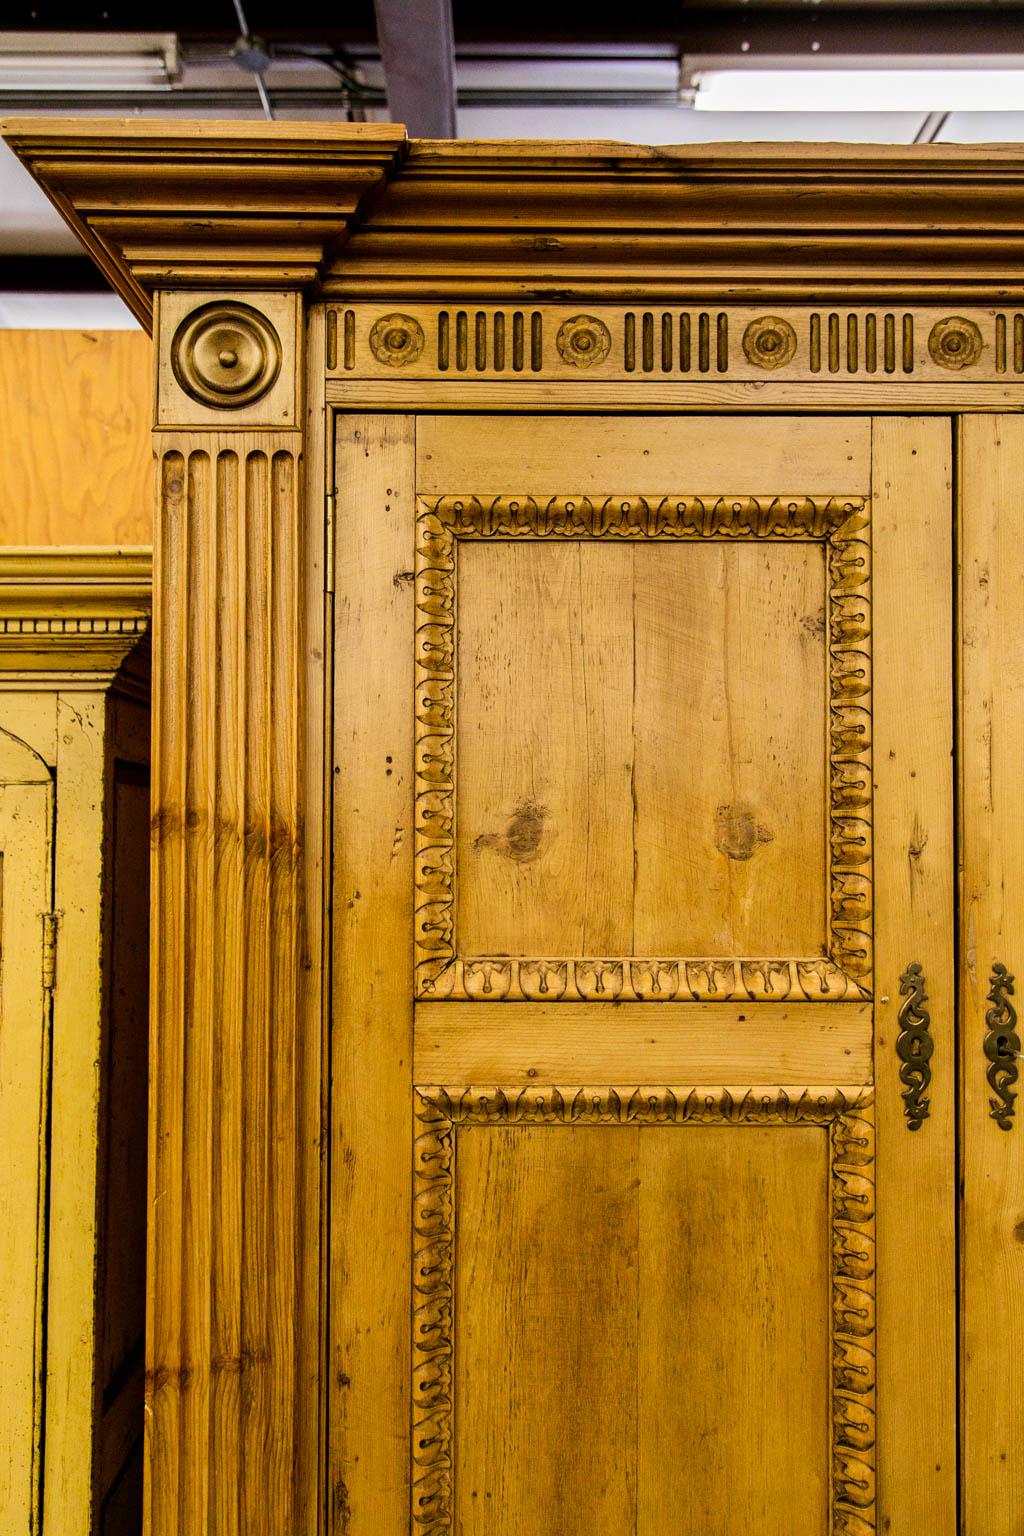 This cupboard is made from antique reclaimed pine. It has carved fluting and rosettes in the frieze and fluting in the stiles of the top and bottom sections. The doors have recessed panels framed with carved moldings. The top interior has one shelf